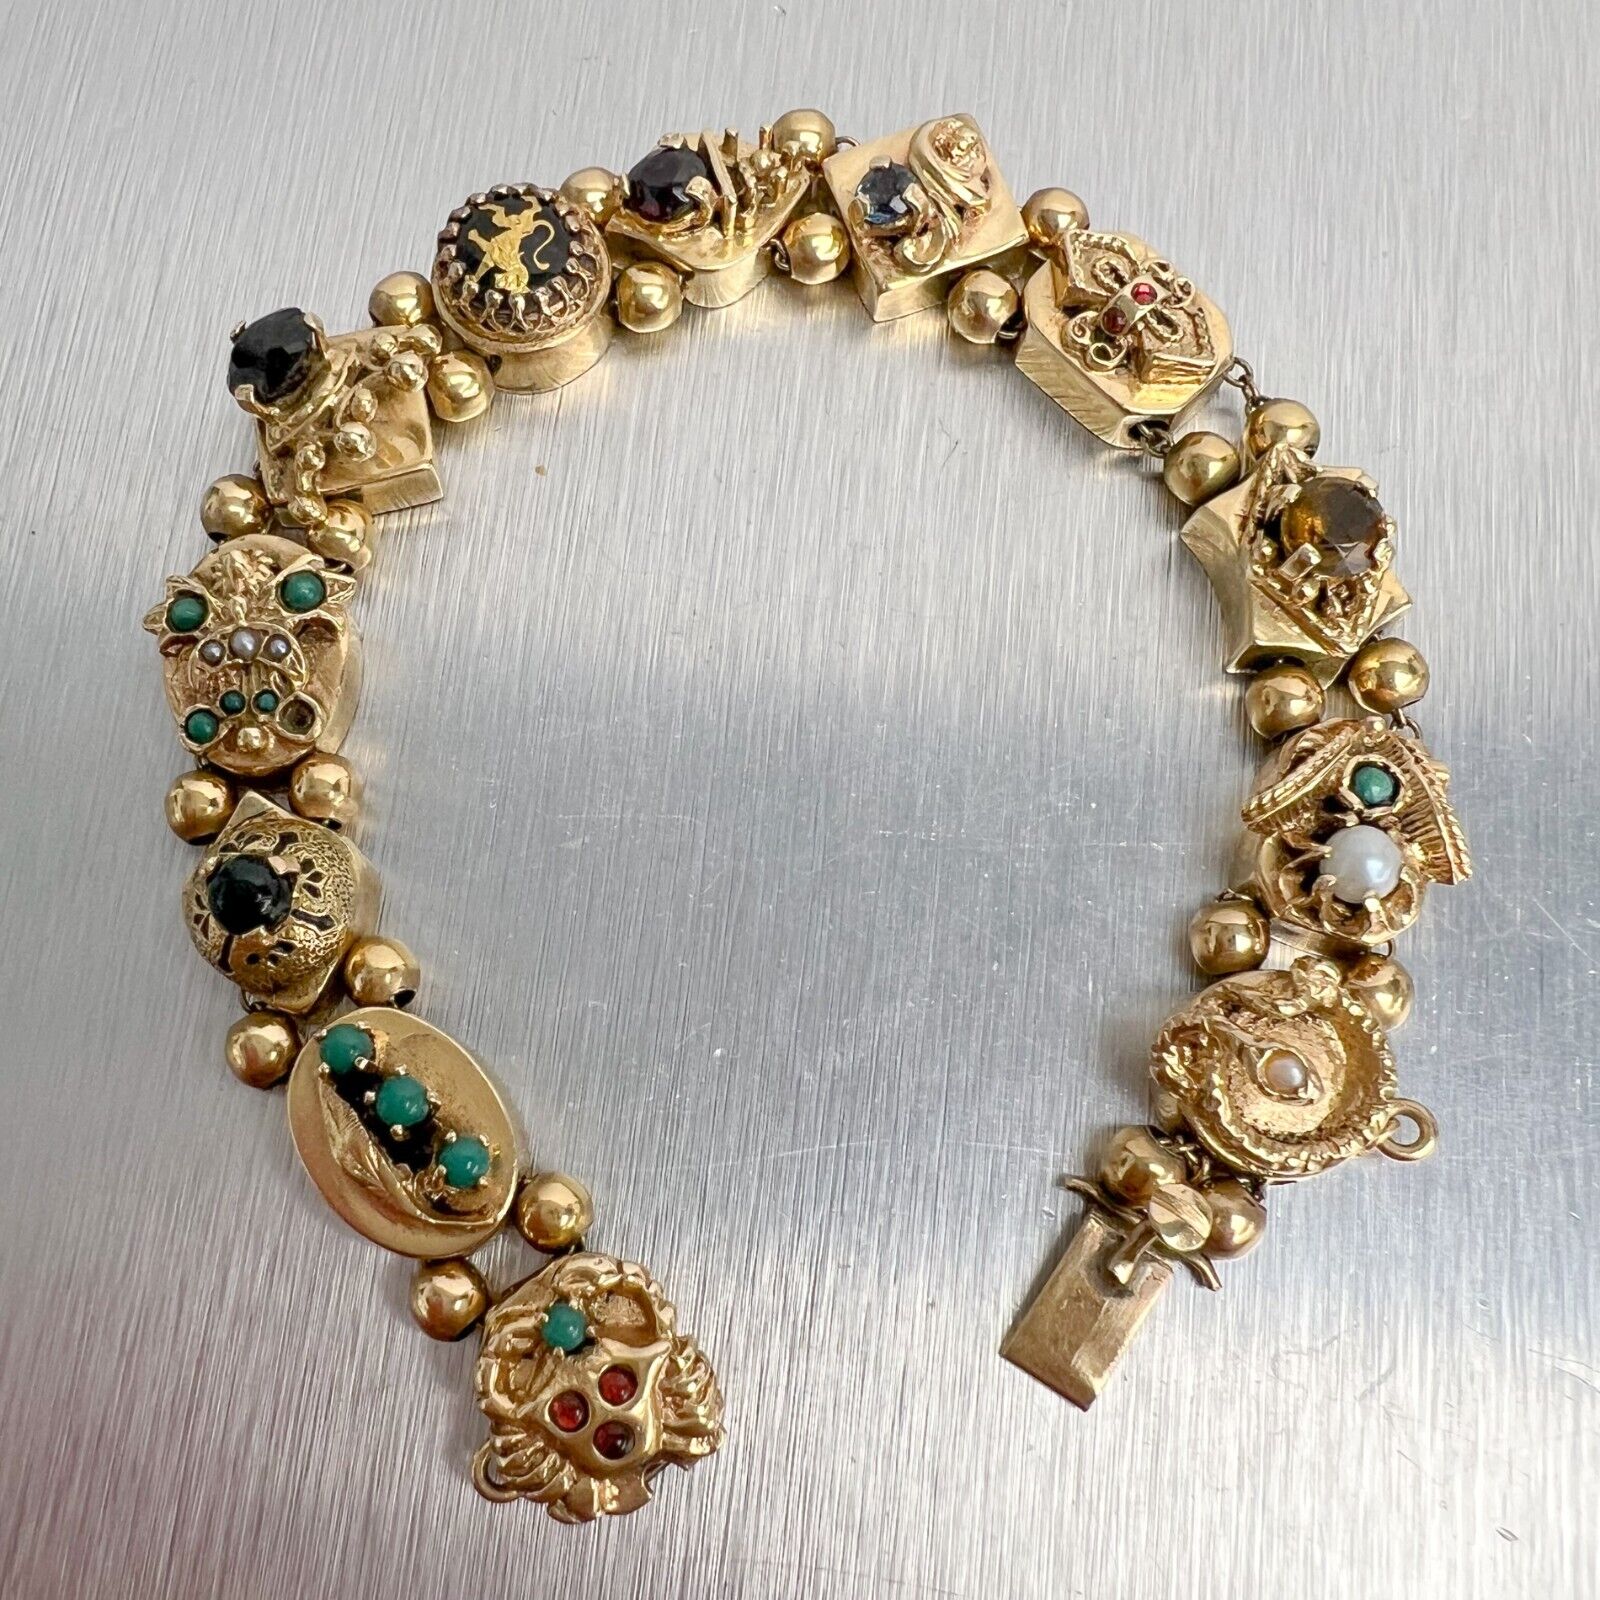 Vintage Solid 14k Yellow Gold Charm Bracelet 7.25 Inches 